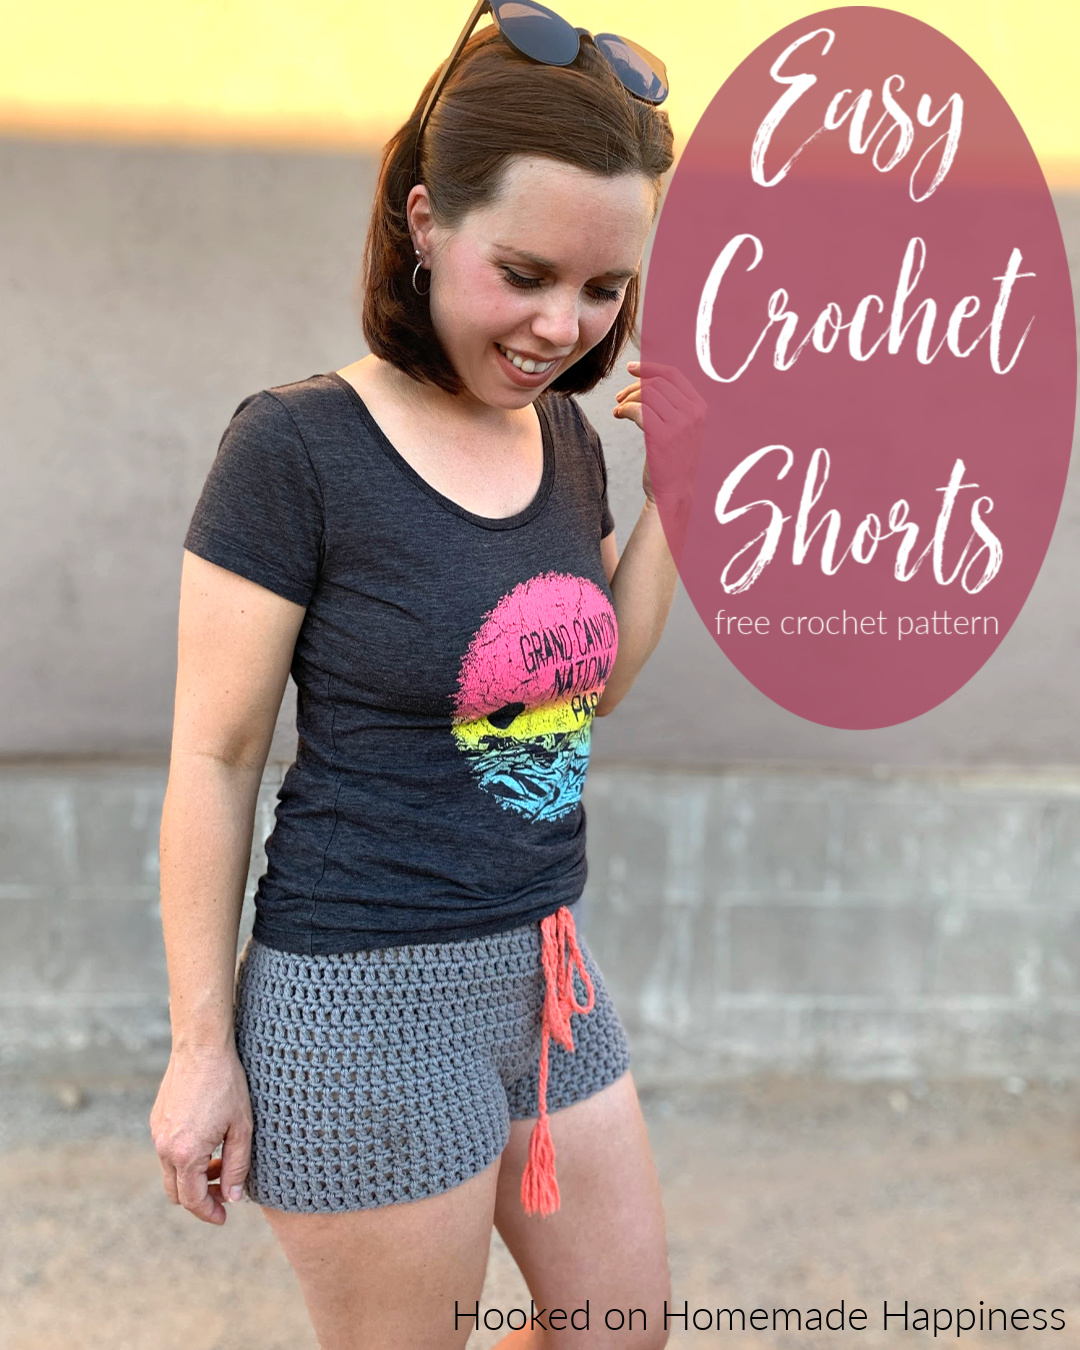 Easy Crochet Shorts Pattern - Hooked on Homemade Happiness